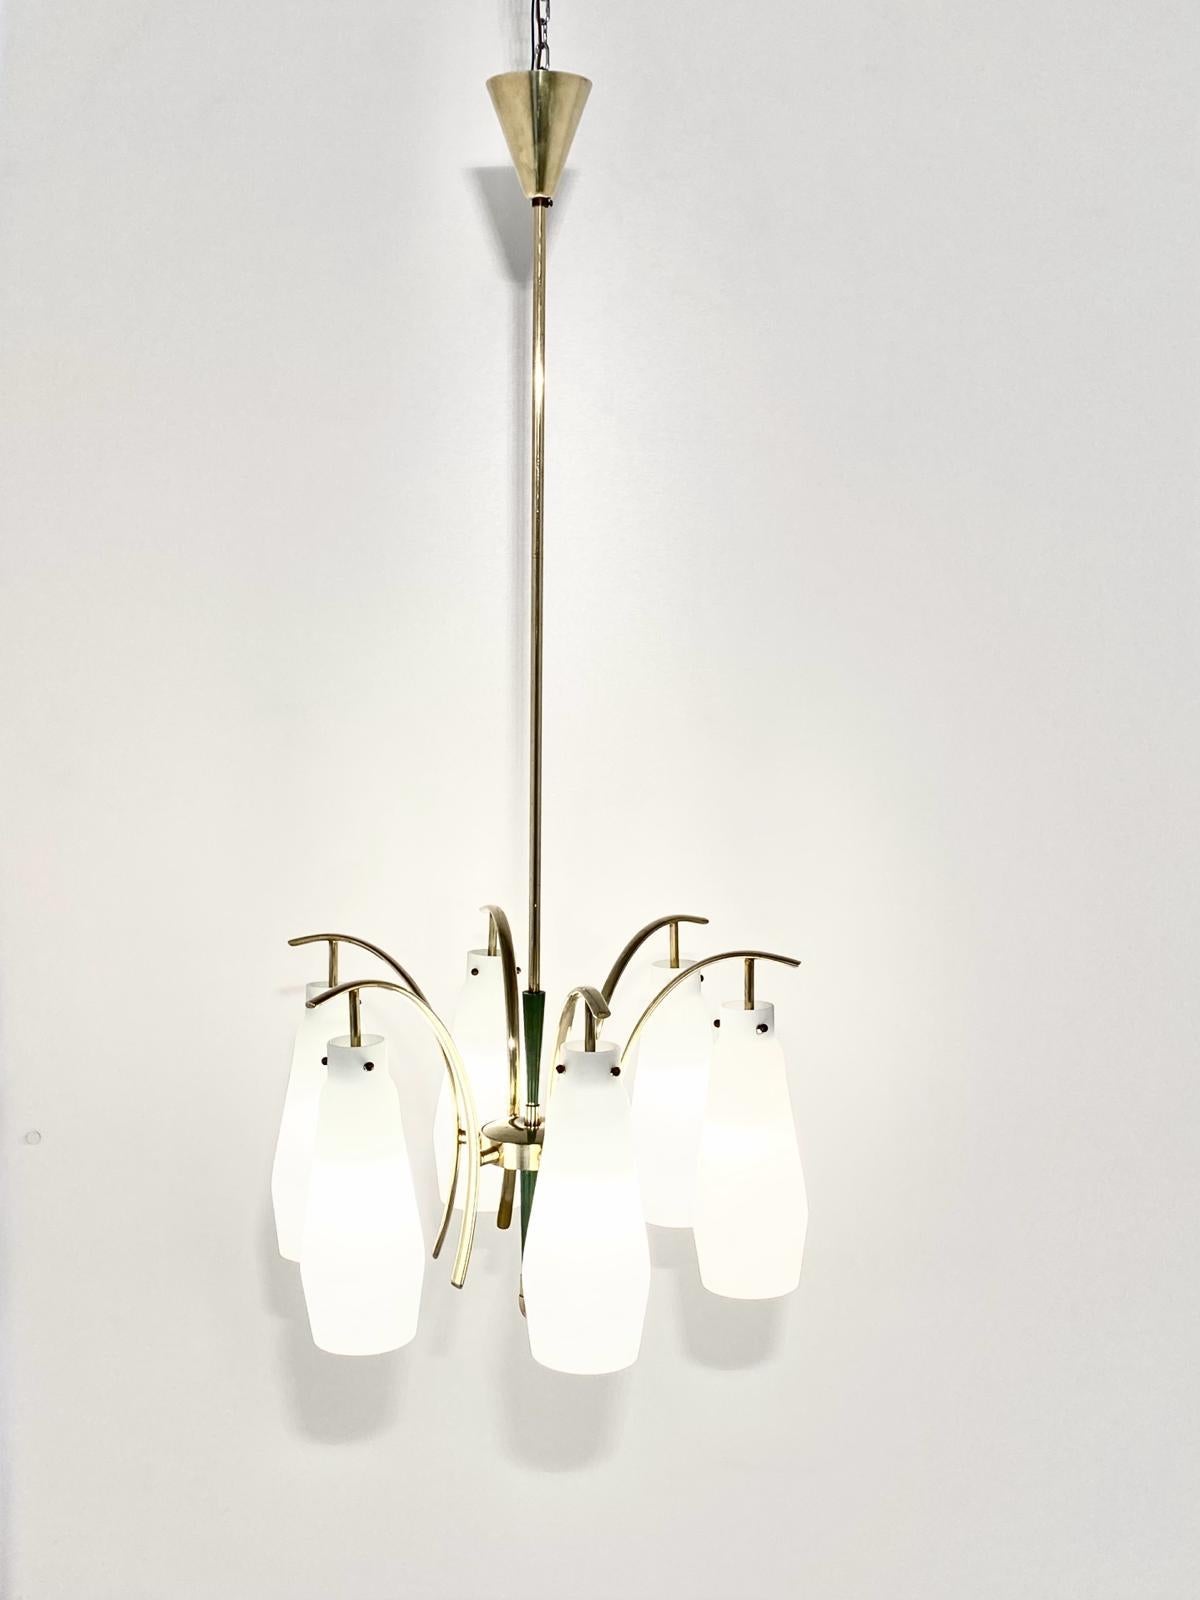 A unique vintage Stilnovo chandelier in pure mid century style.
The chandelier, manufactured in Italy in the mid-1950s by iconic Stilnovo company, is made of six brass arms and six frosted glass lampshades. The lamp frame is also made of brass and